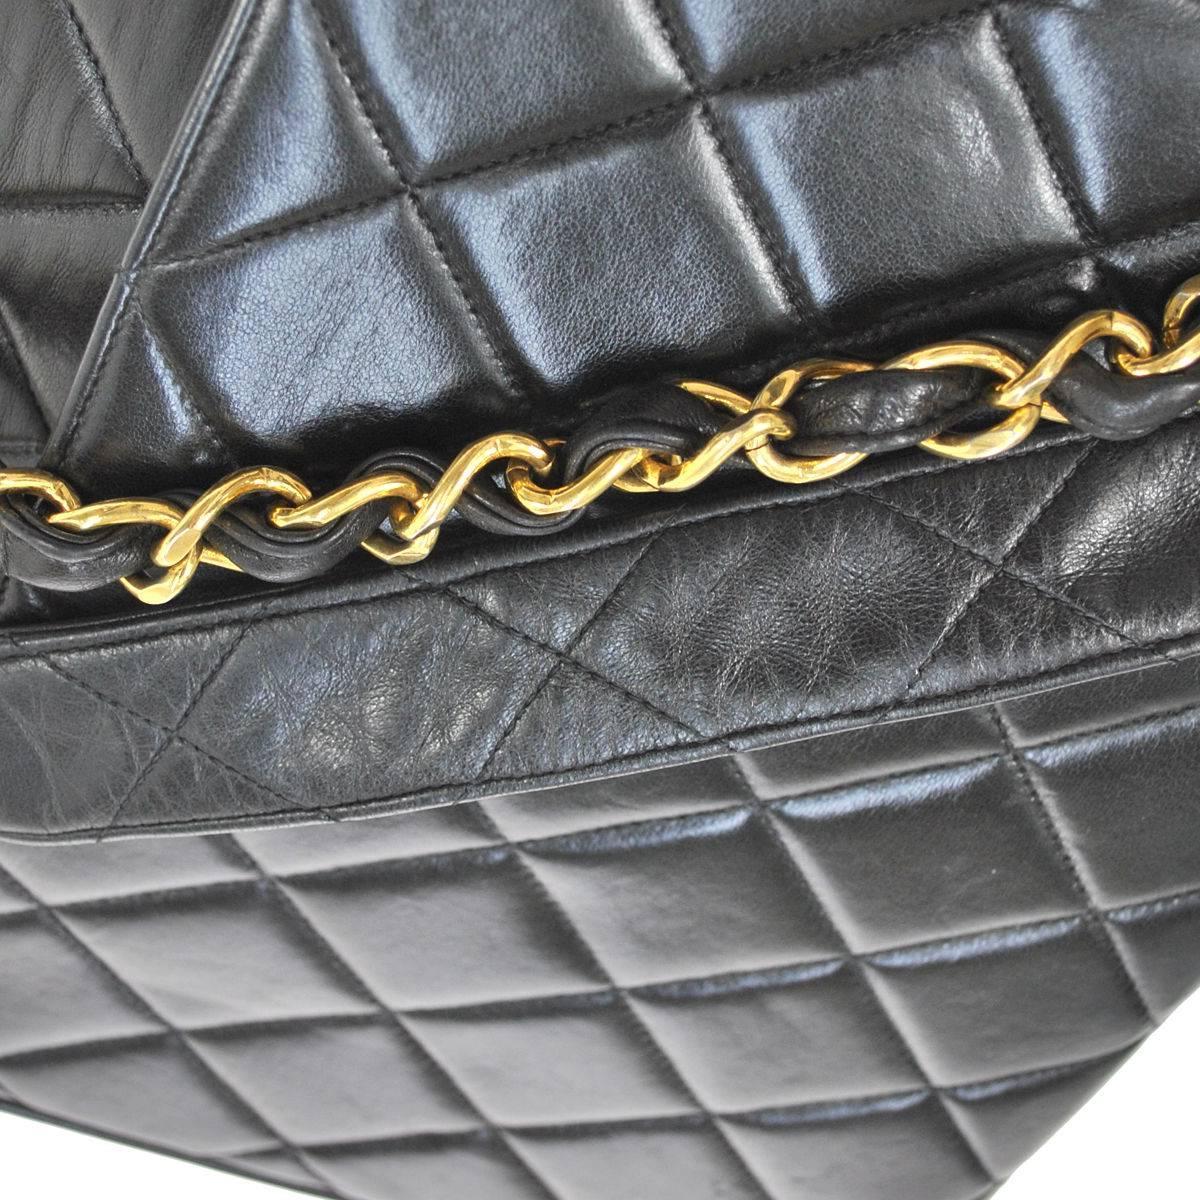 CURATOR'S NOTES

Chanel Black Lambskin Leather Turnlock Shoulder Evening Flap Bag  

Lambskin leather
Gold tone hardware
Leather lining 
Turnlock closure 
Made in France
Shoulder strap drop 20"
Measures 10" W x 8" H x 3.5" D